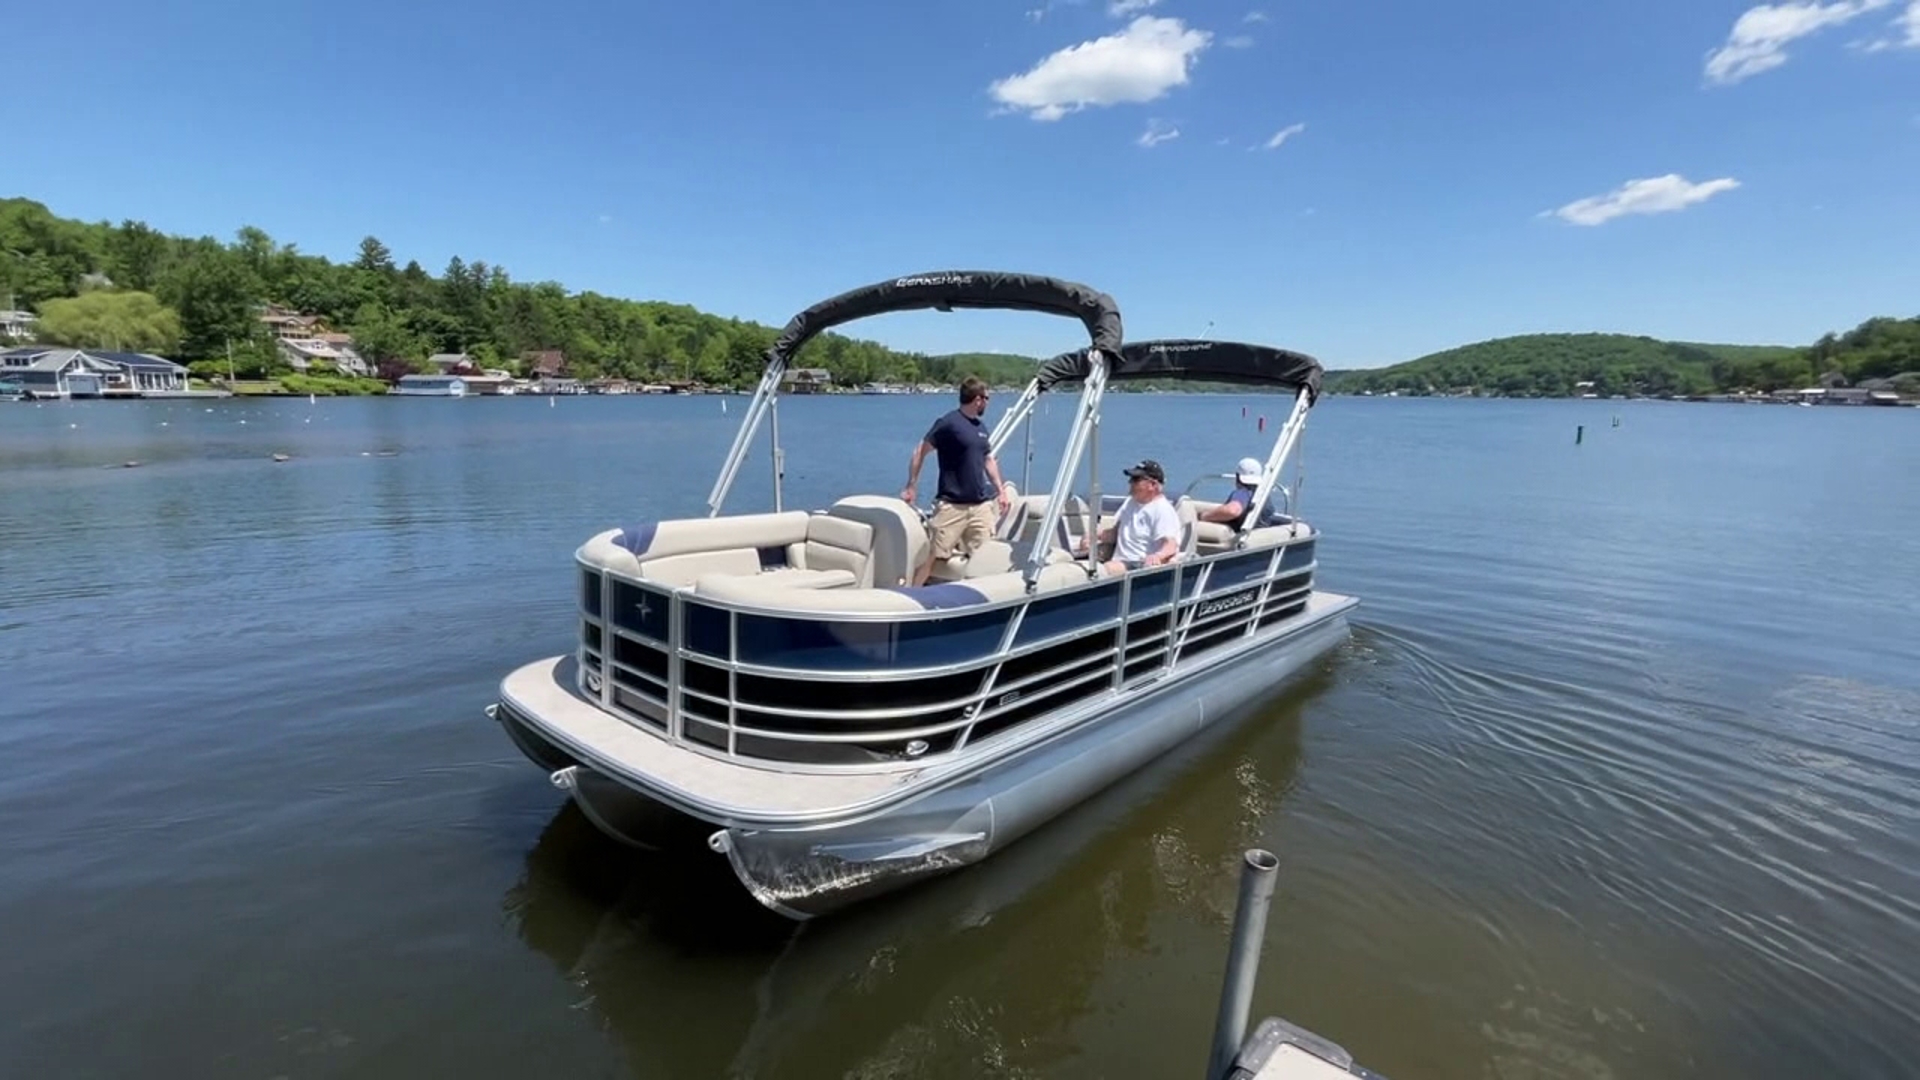 It was an early start for some boaters in Luzerne County this Memorial Day Weekend.